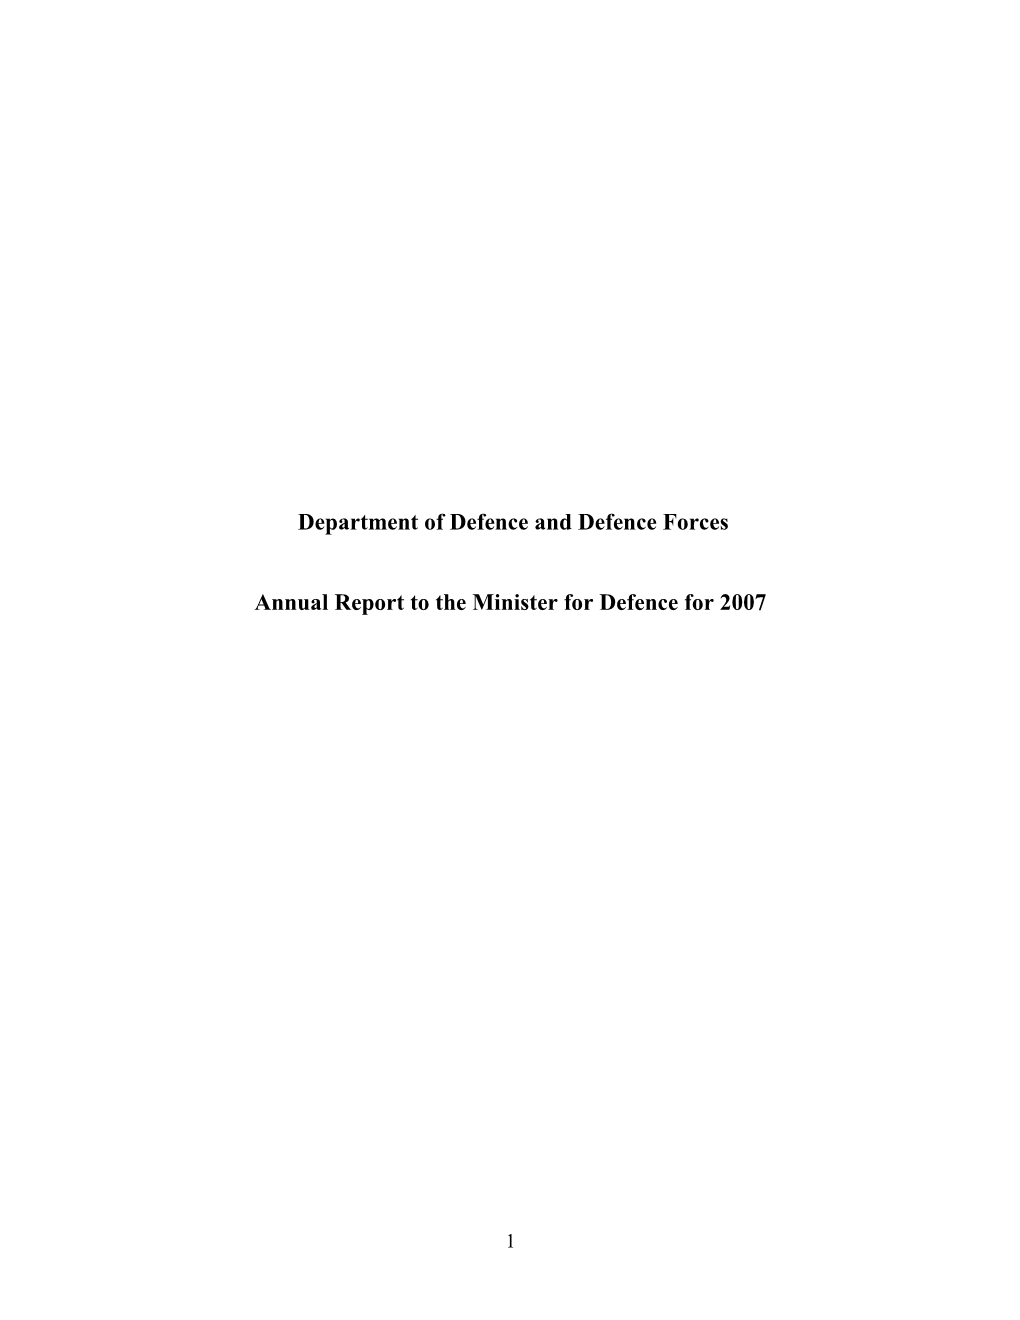 Department of Defence and Defence Forces Annual Report To